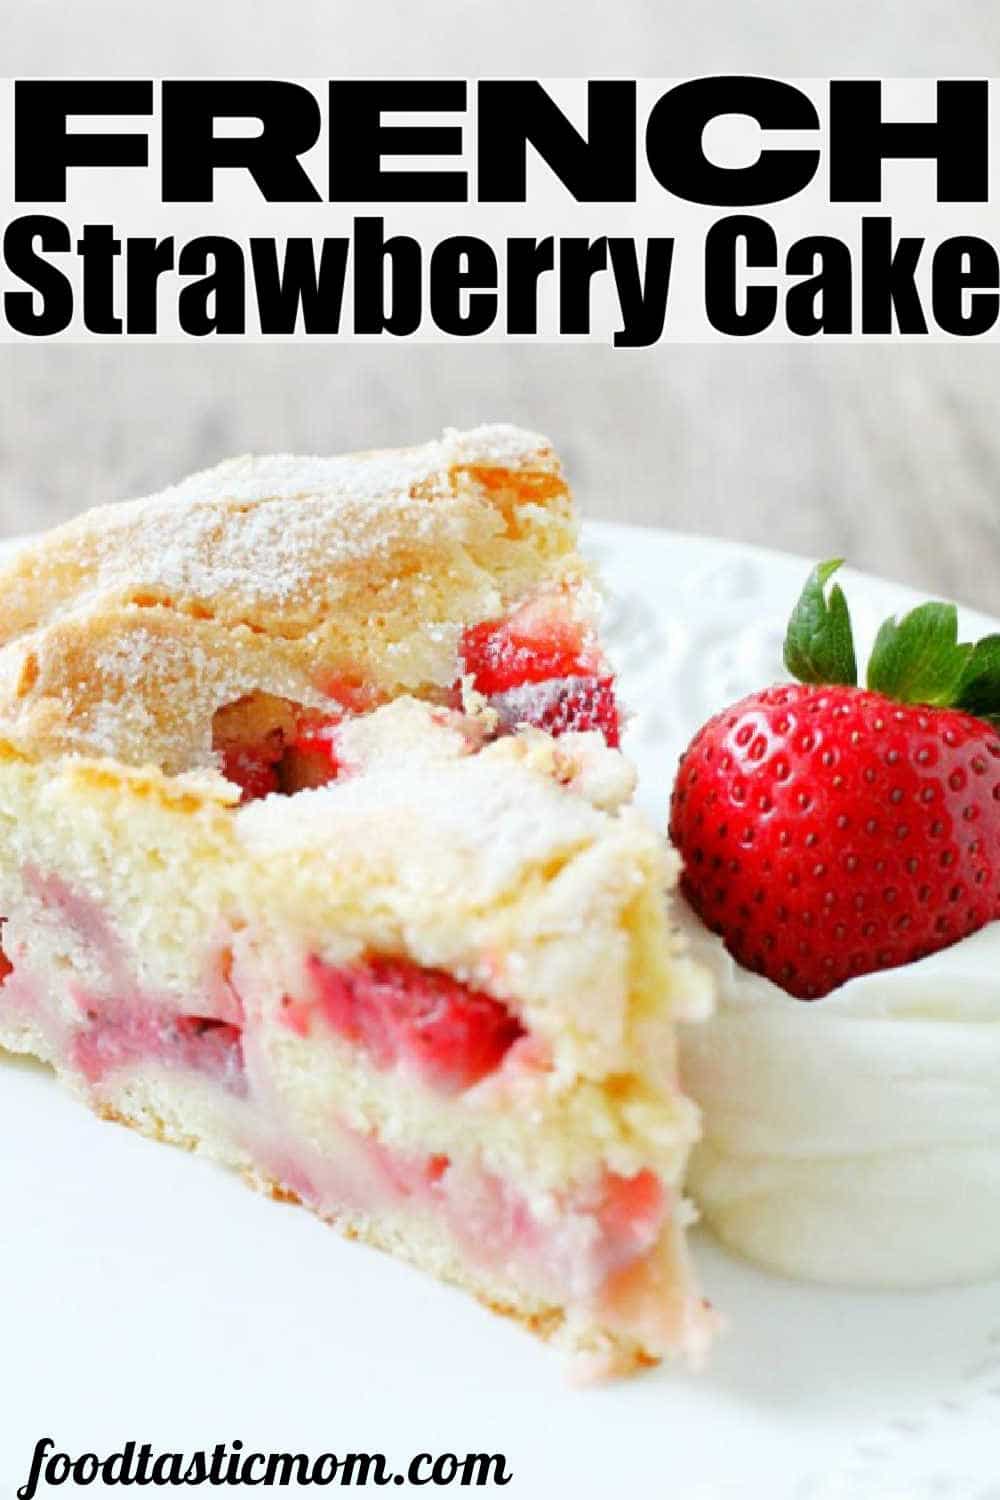 French Strawberry Cake | Foodtastic Mom #frenchstrawberrycake #cakerecipes #strawberryrecipes #dessertrecipes #strawberrycake via @foodtasticmom